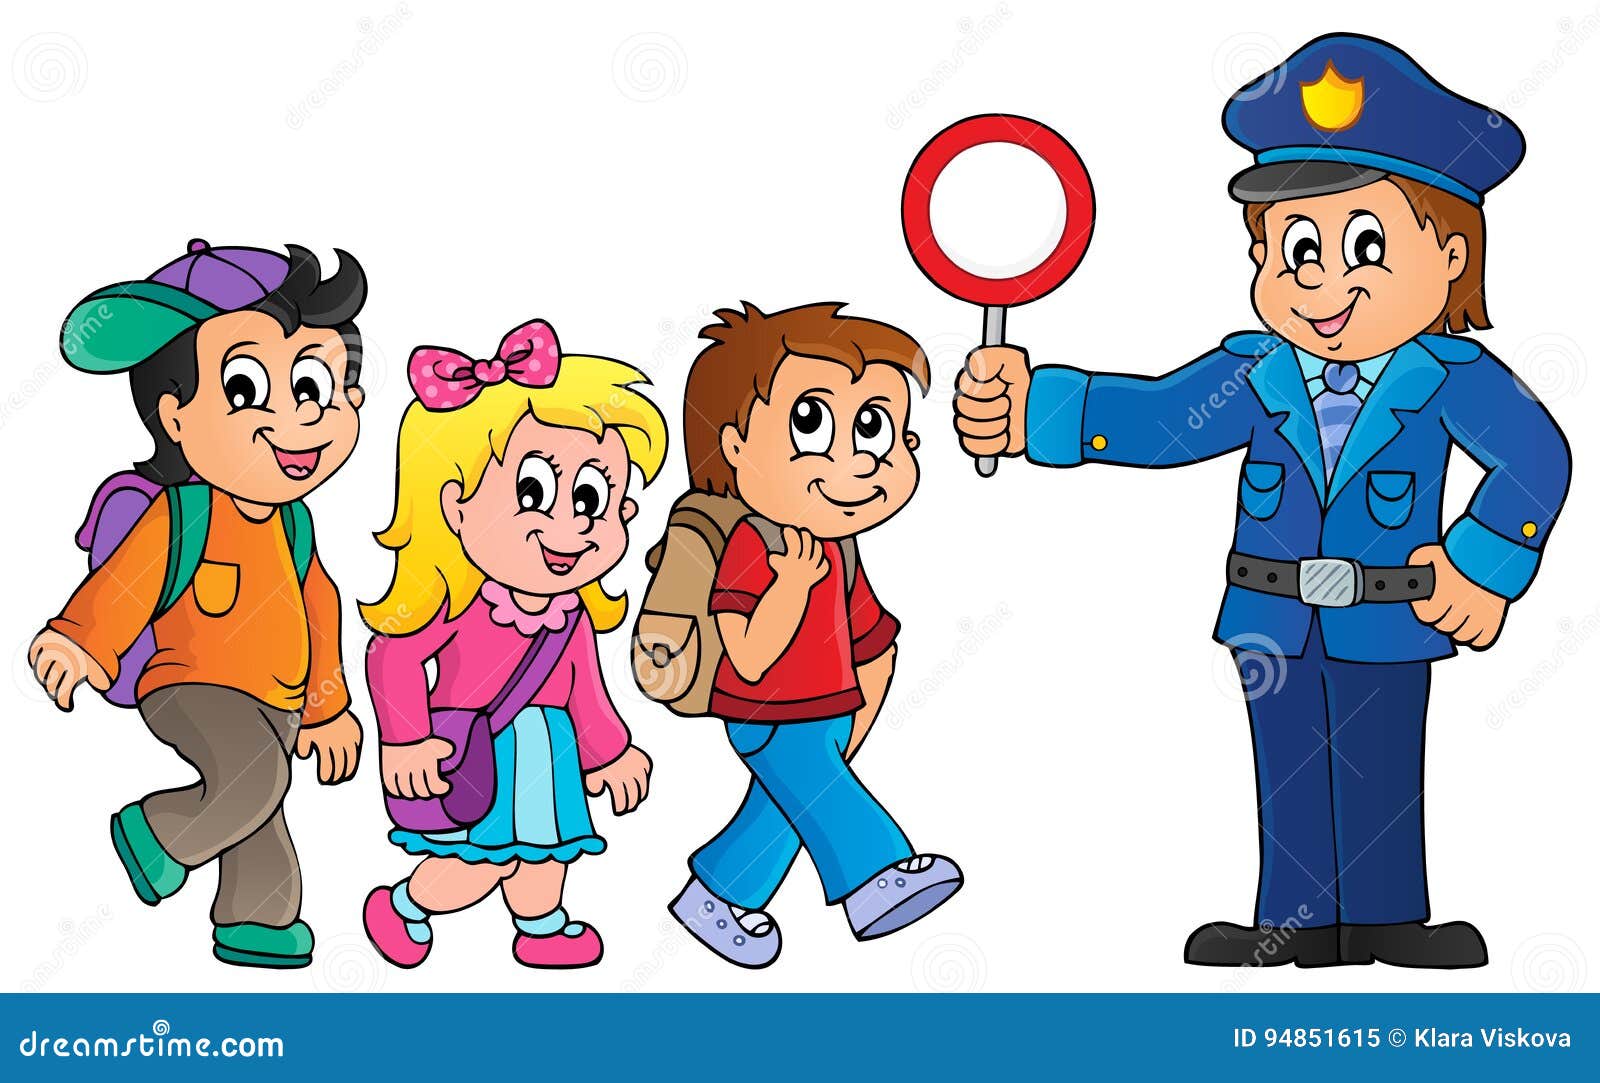 pupils and policeman image 1